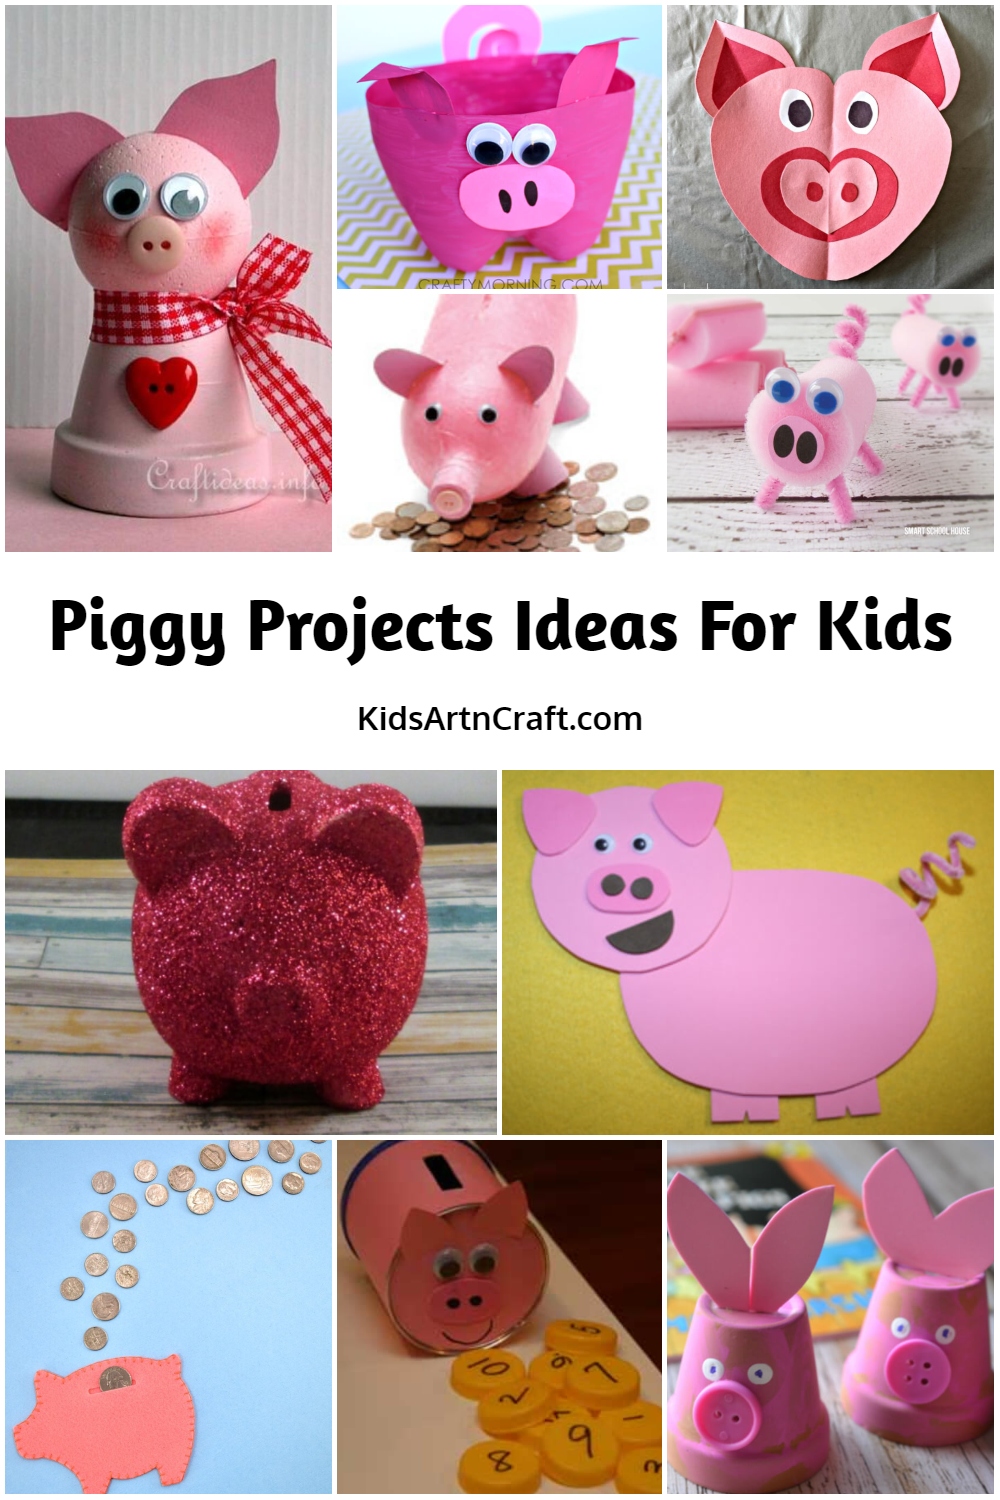 Piggy Projects Ideas For Kids